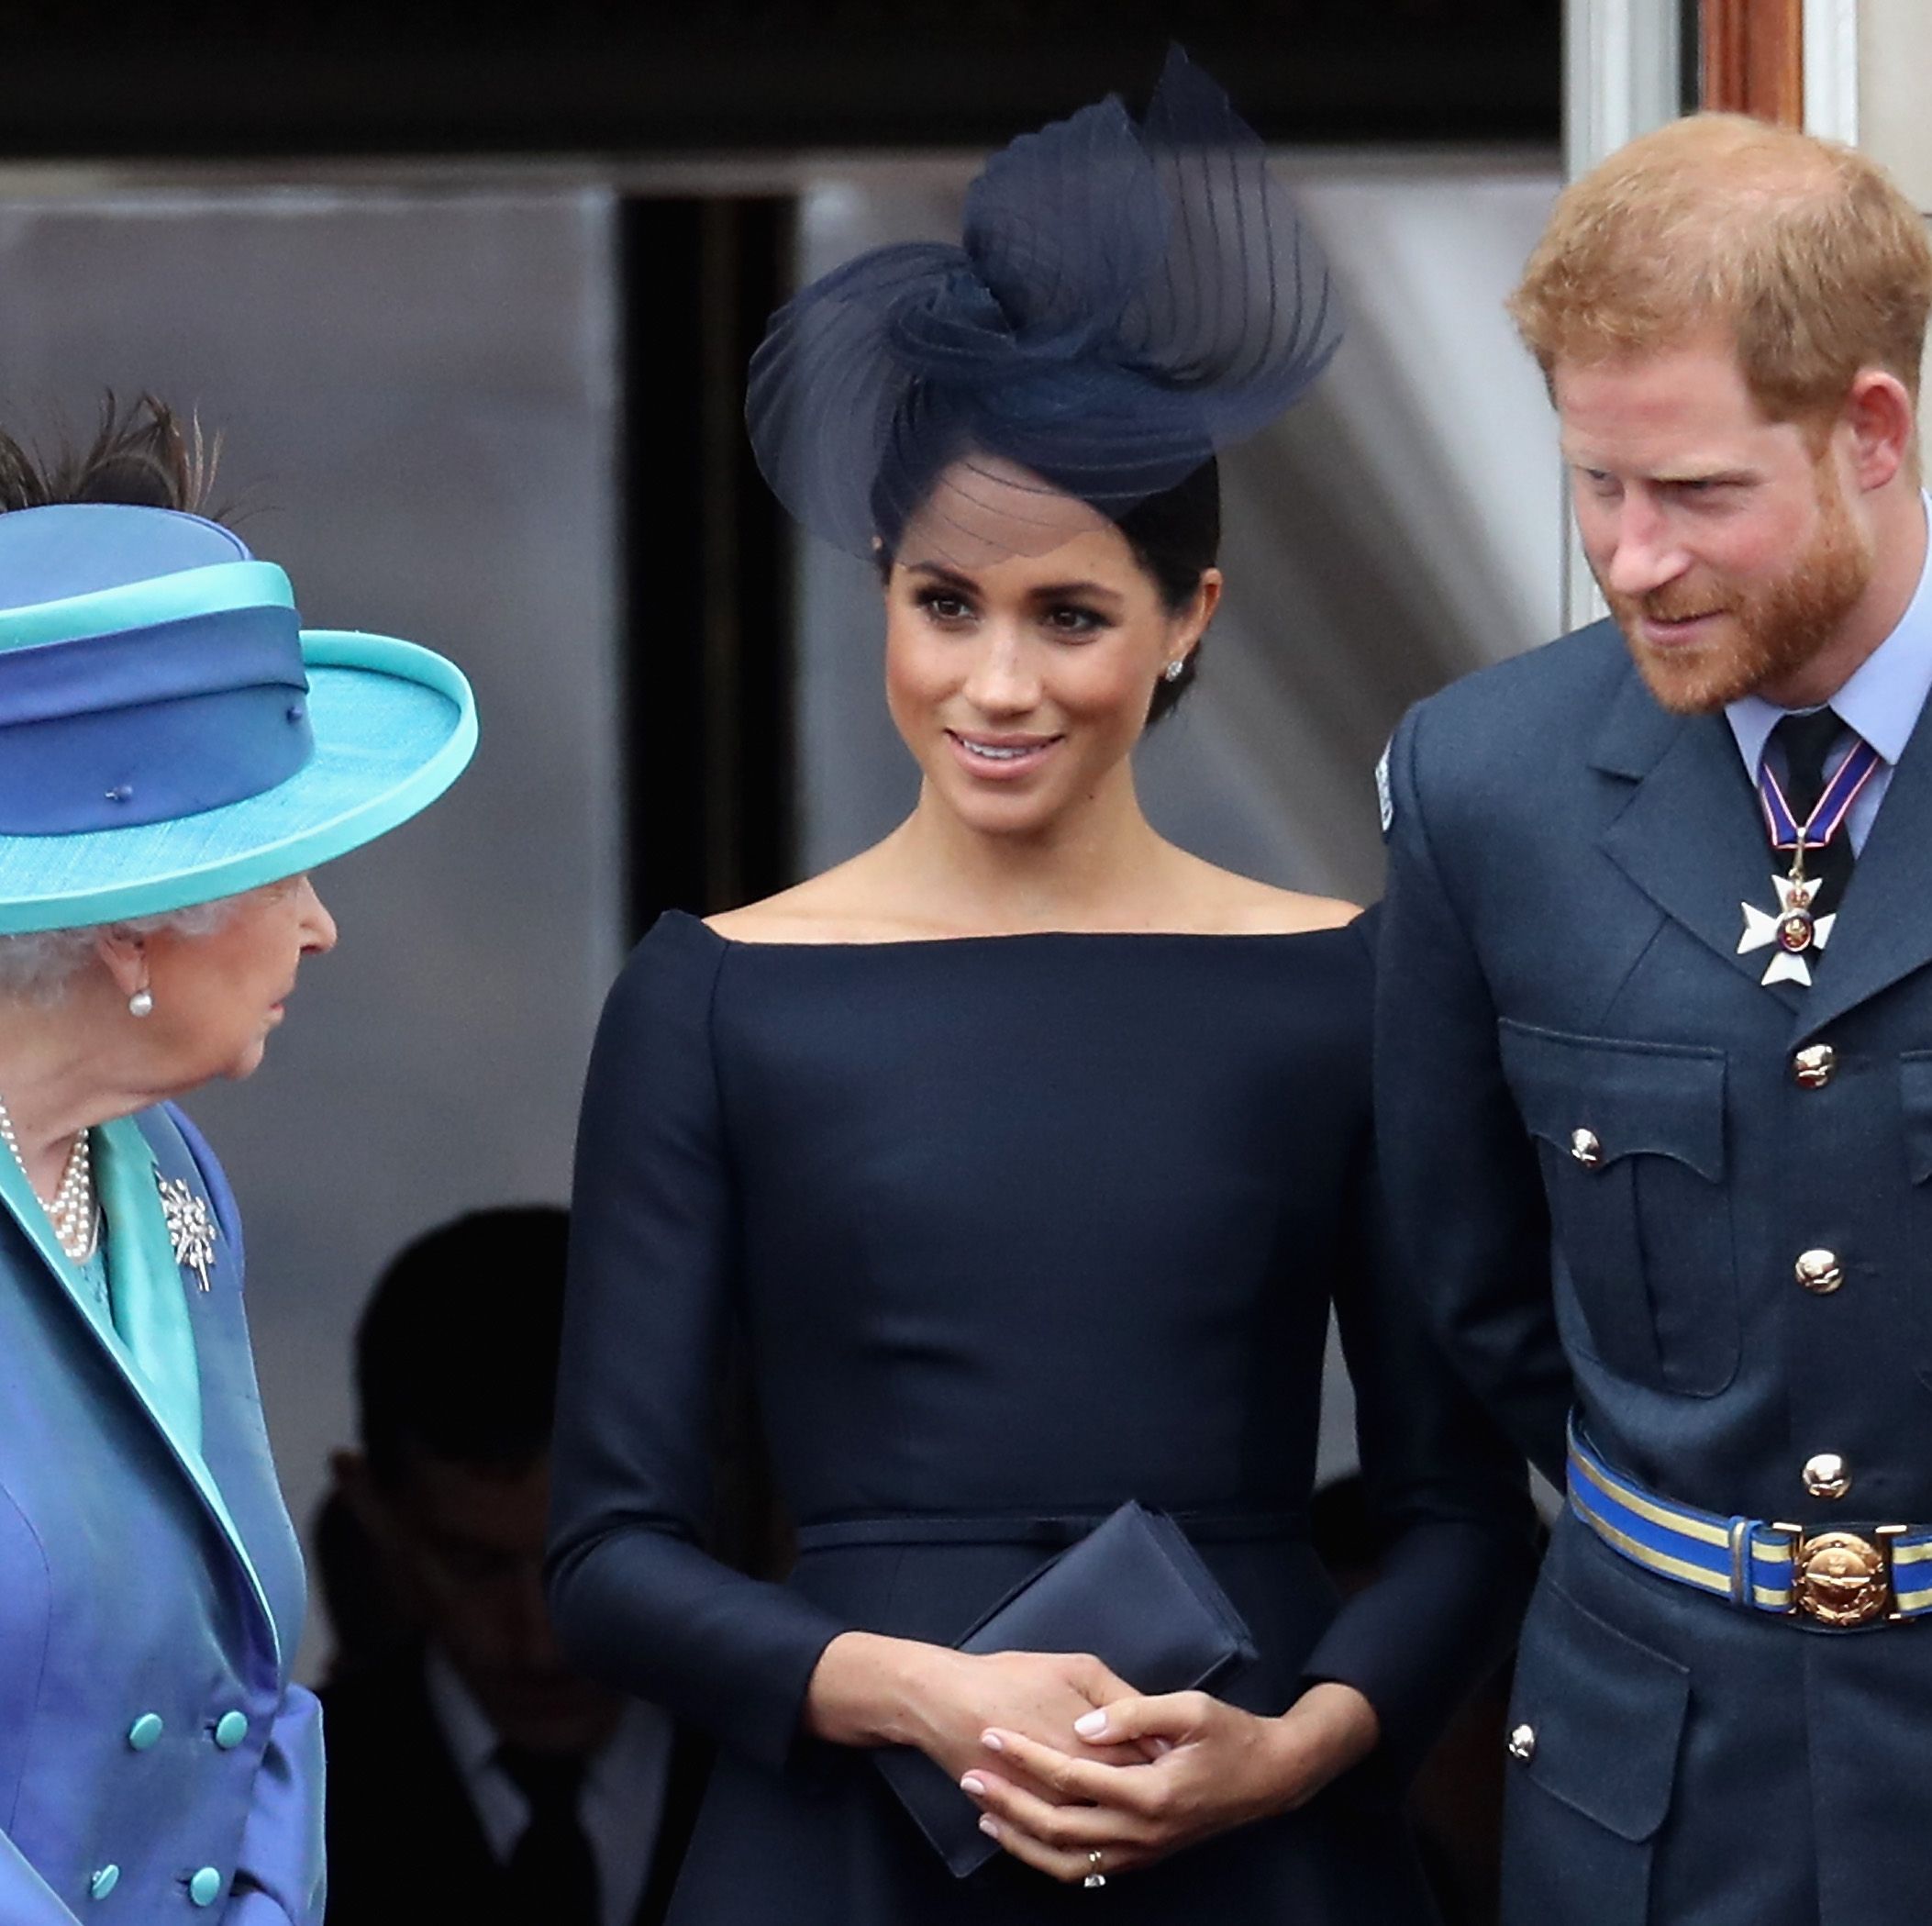 Palace Aides Only Let the Queen Spend 15 Minutes with Meghan Markle and Prince Harry at the Jubilee